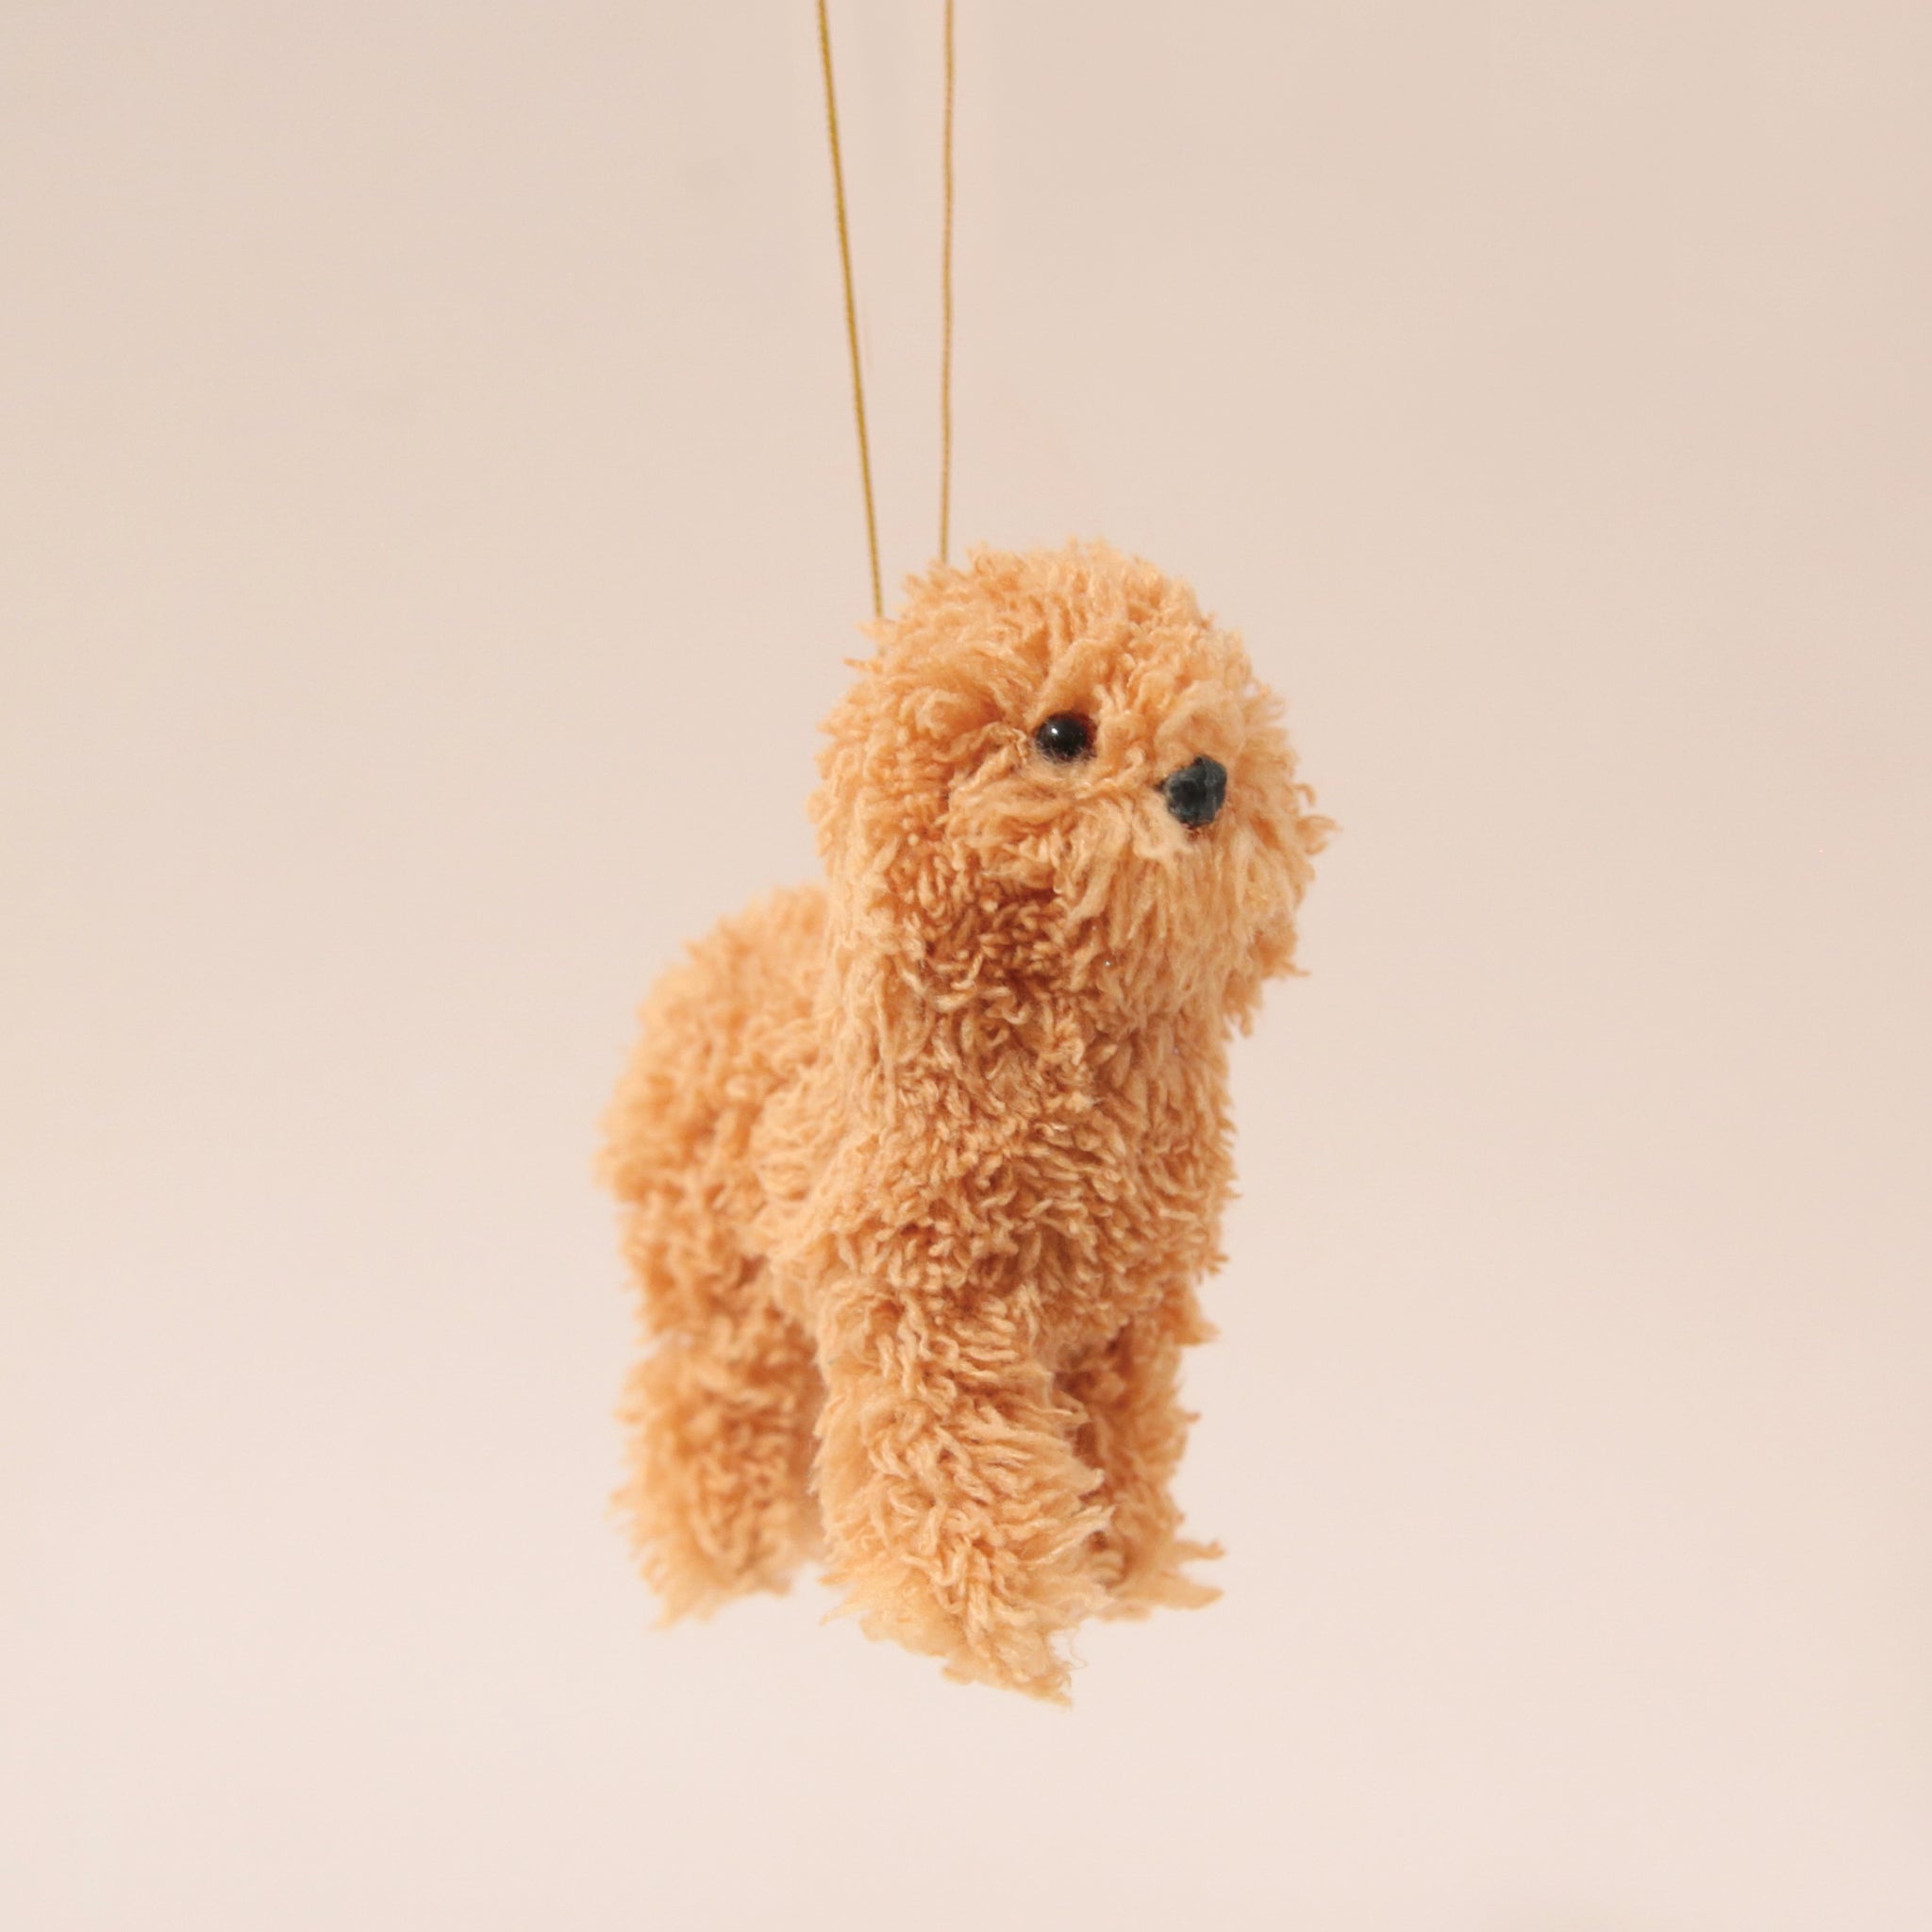 A caramel furry poodle ornament with a gold loop for hanging.